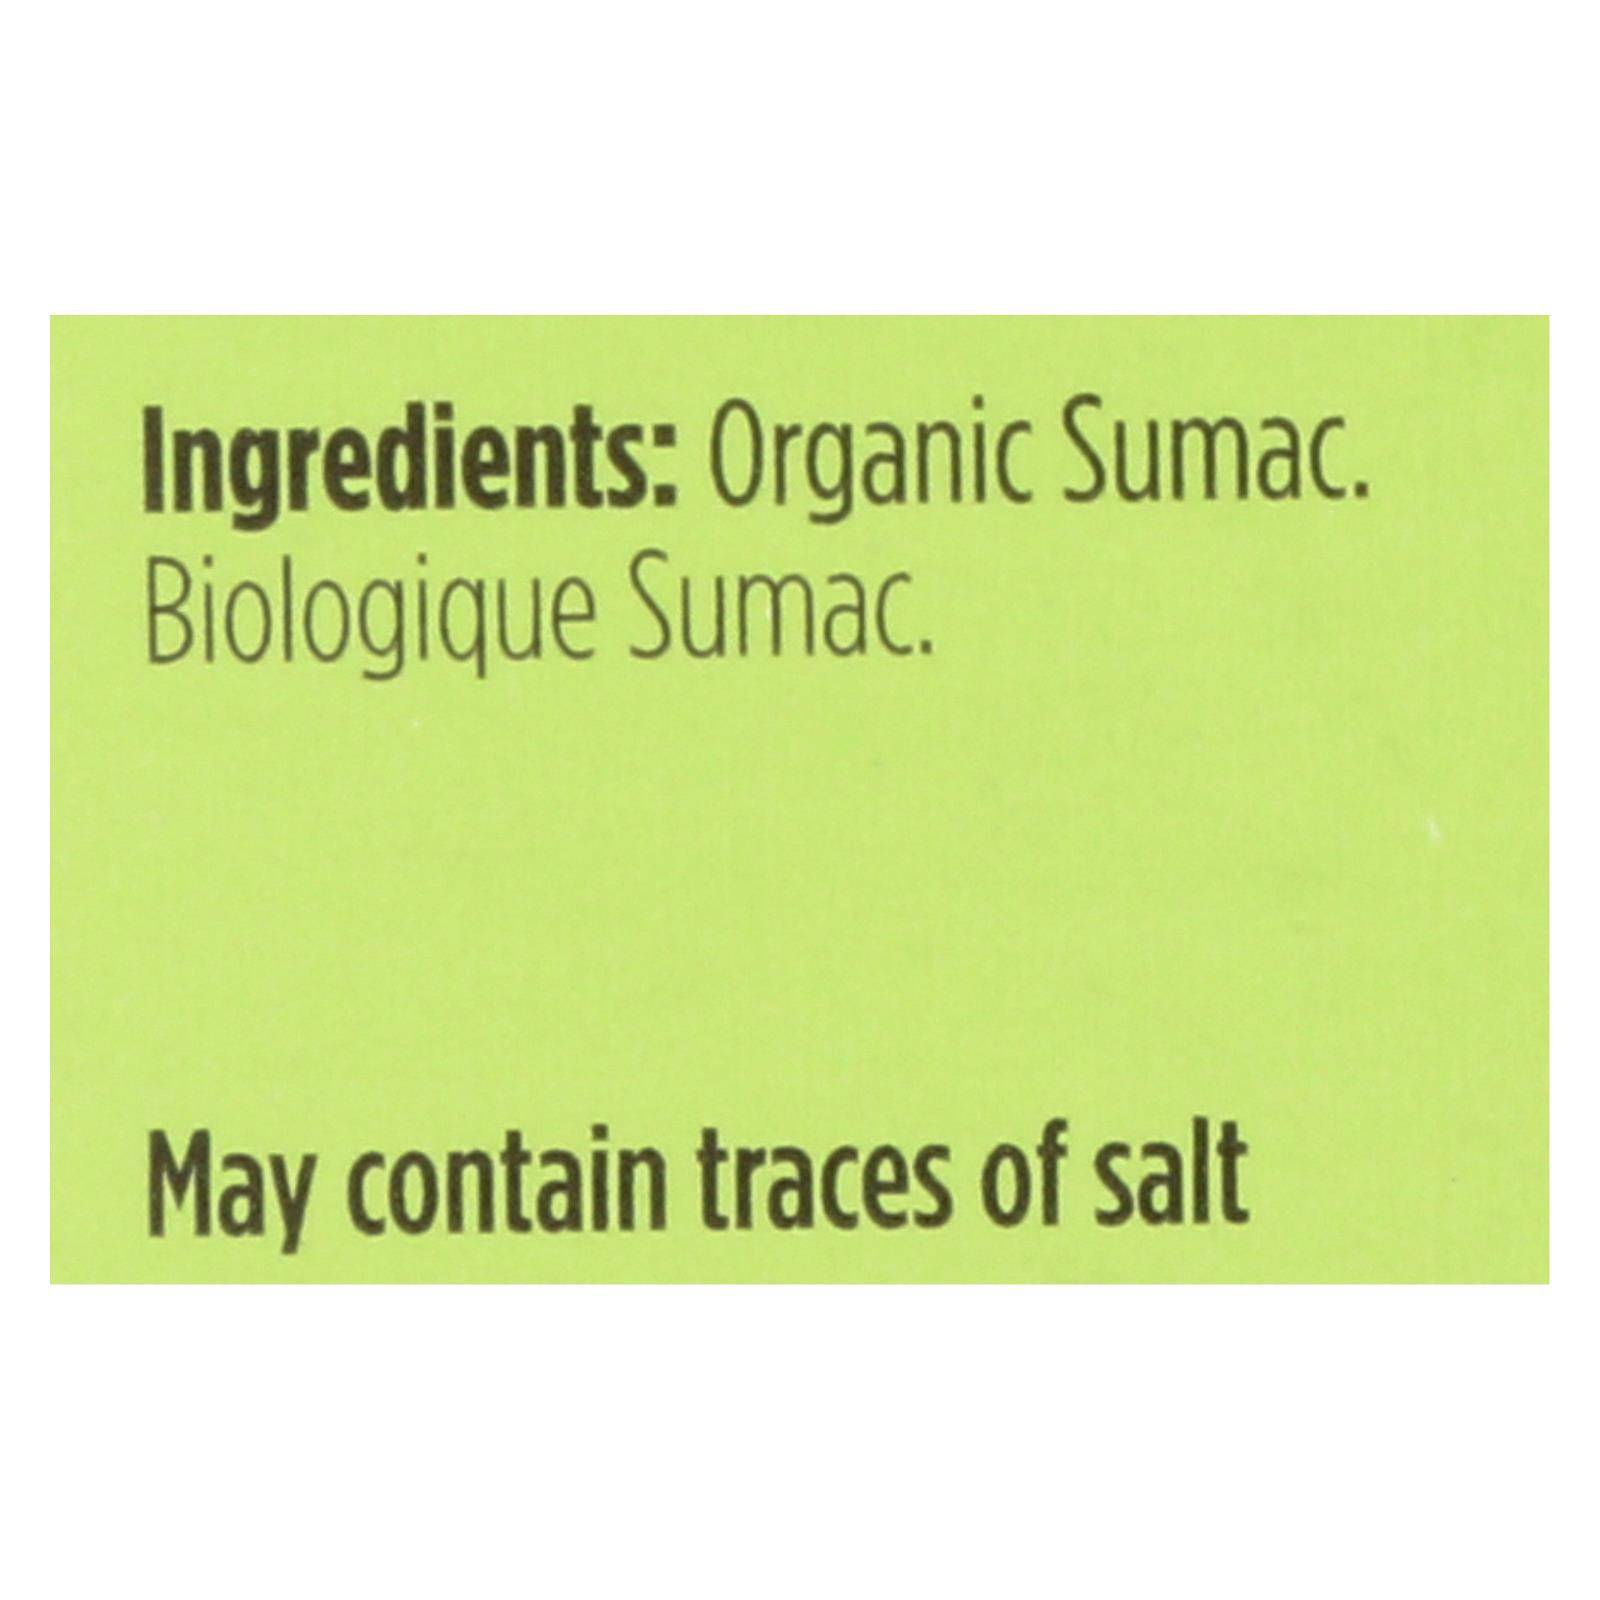 Buy Spicely Organics - Organic Sumac - Case Of 6 - 0.45 Oz.  at OnlyNaturals.us